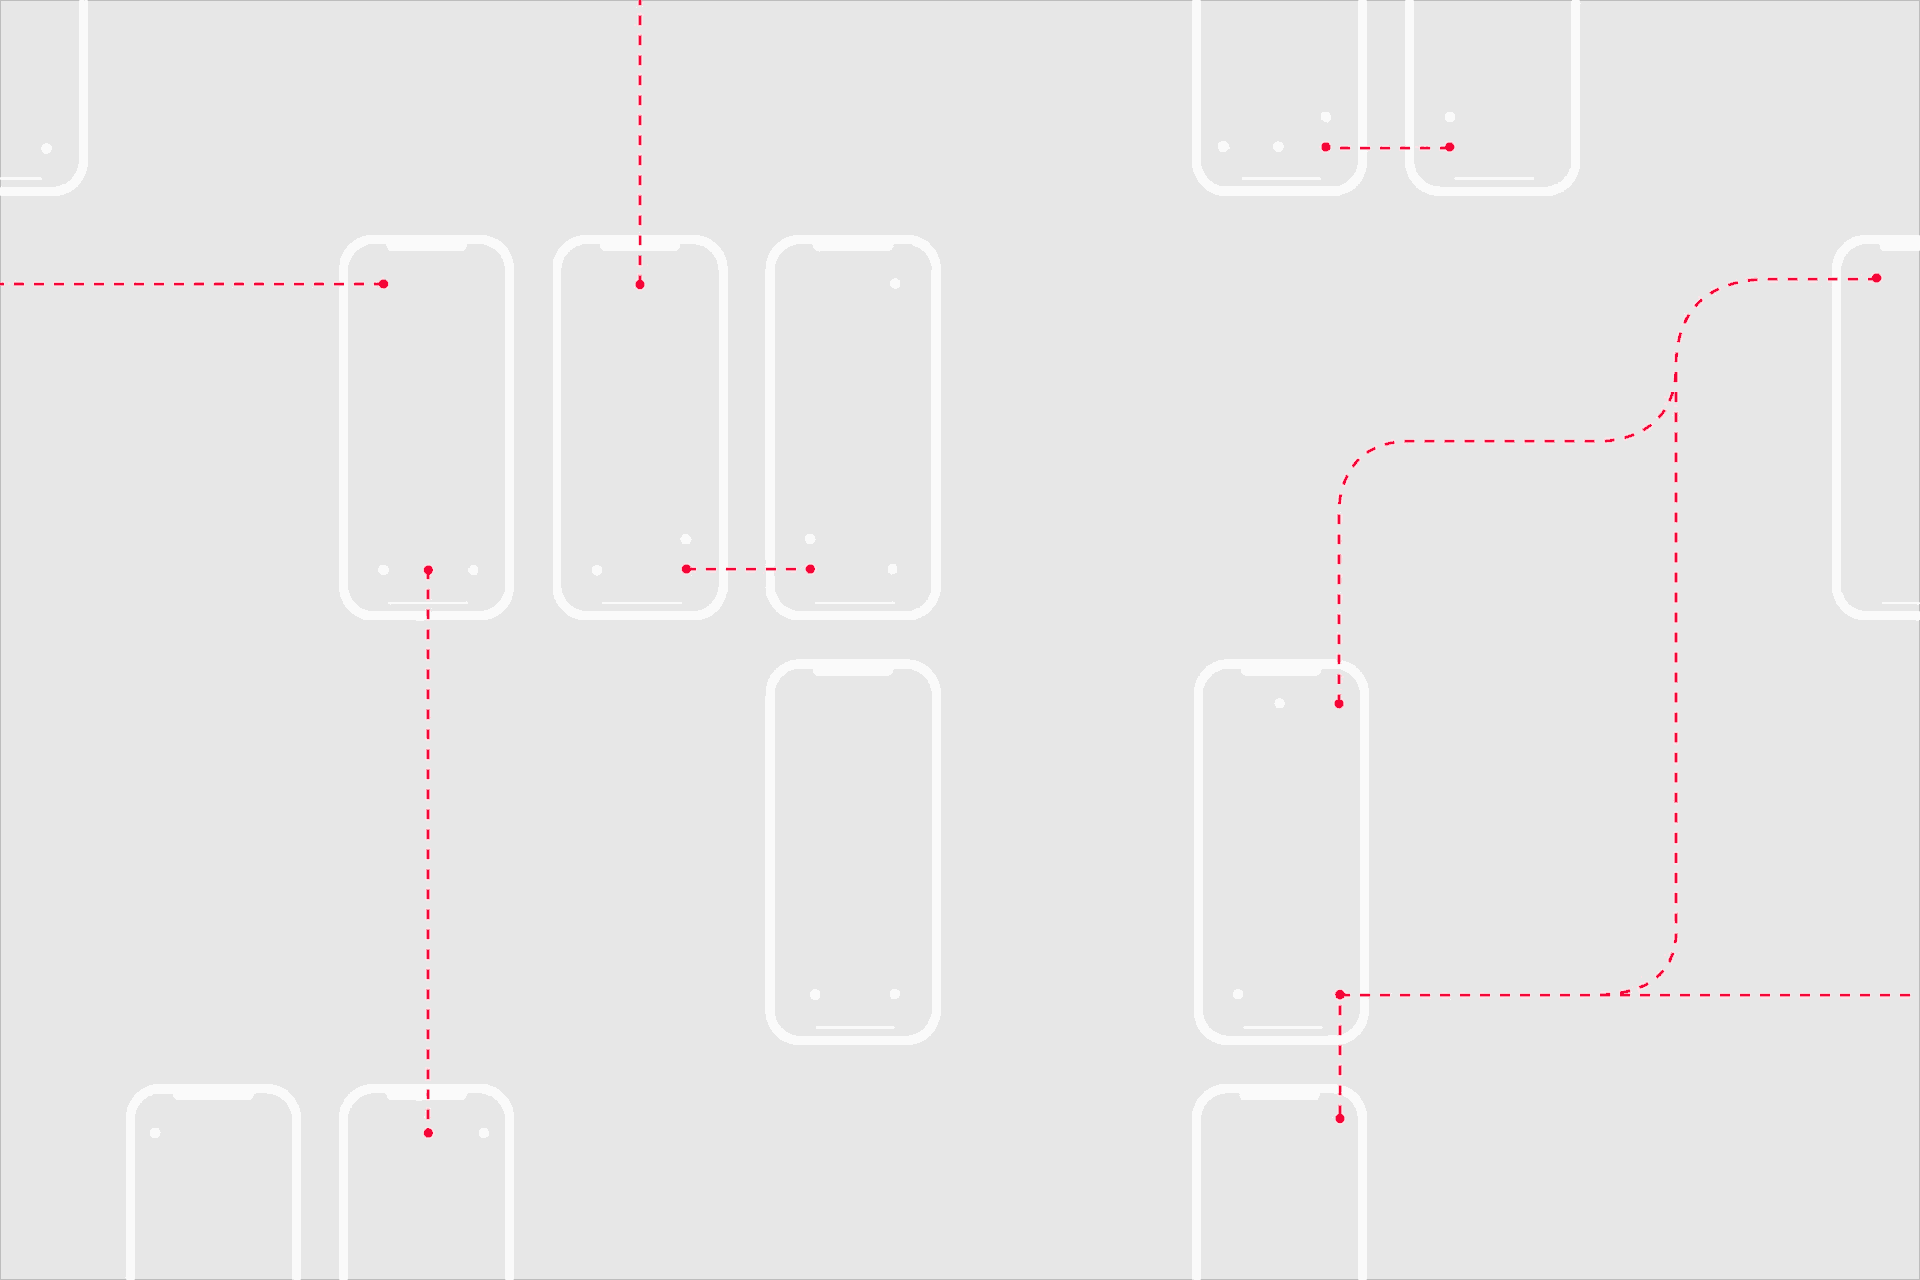 The illustration shows rectangular shapes that can symbolize relays or cell phones. These interconnect at regular intervals by being connected by lines.